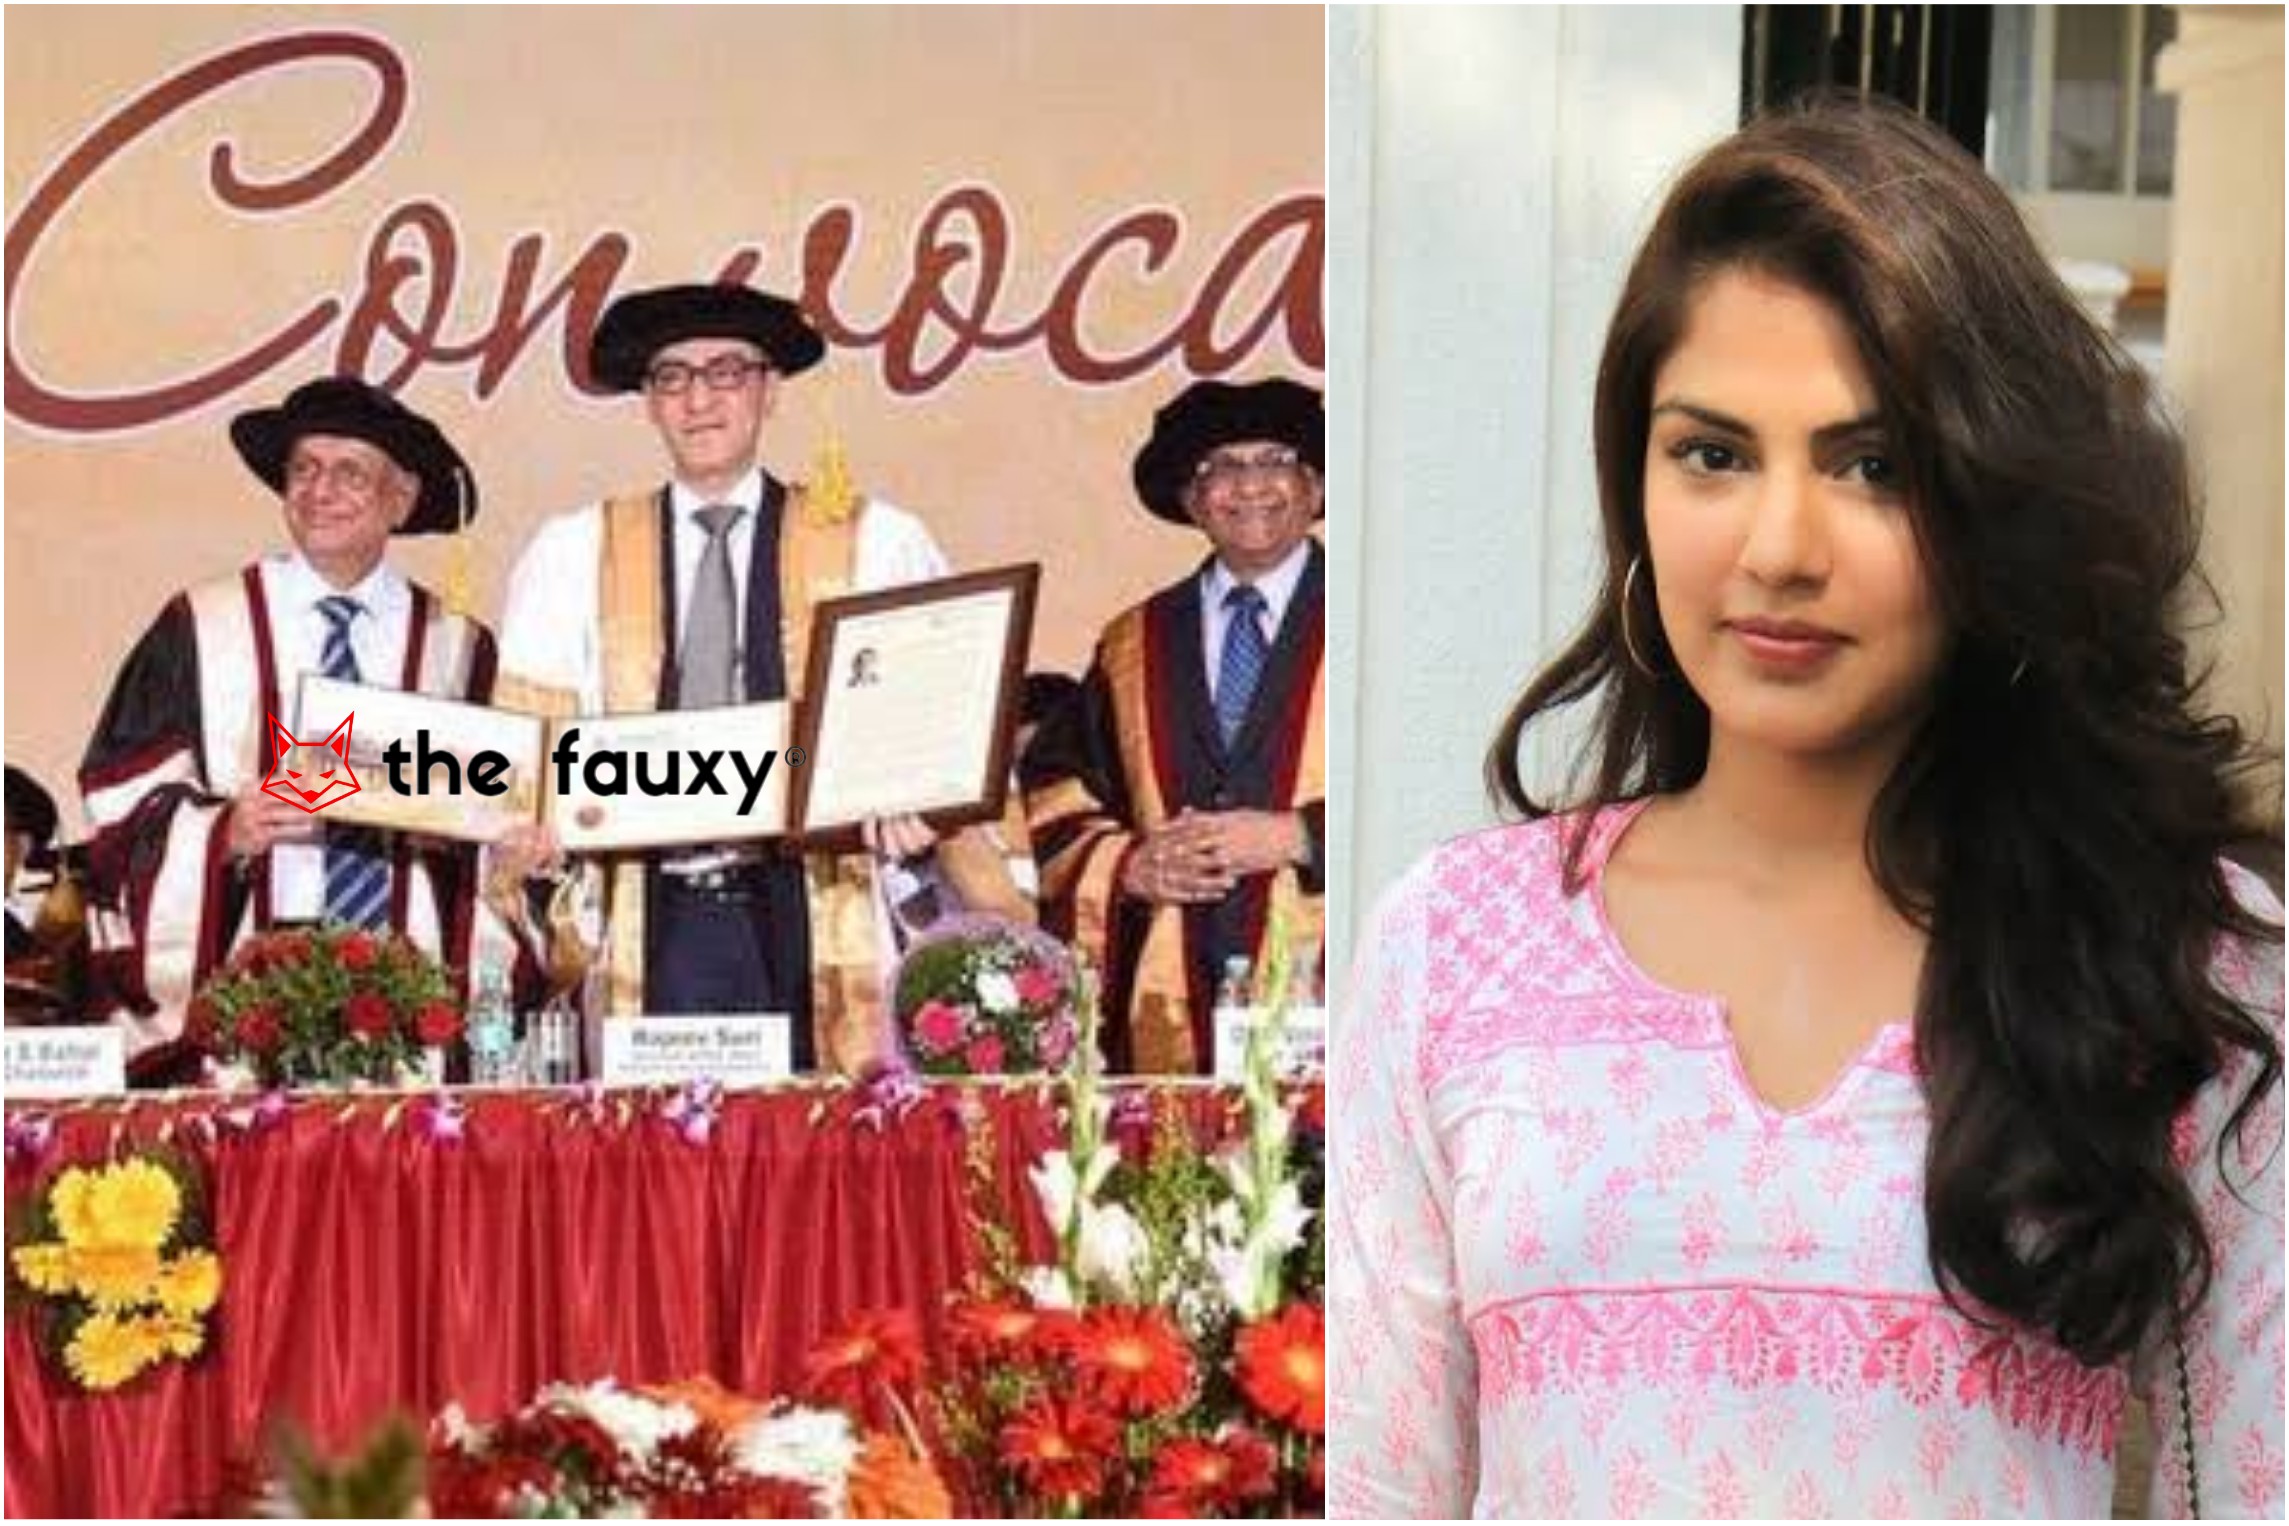 Manipal University to Felicitate Rhea with Doctorate Degree after Rhea Rightly Remembers Sushant’s Five-Year-Old Medications